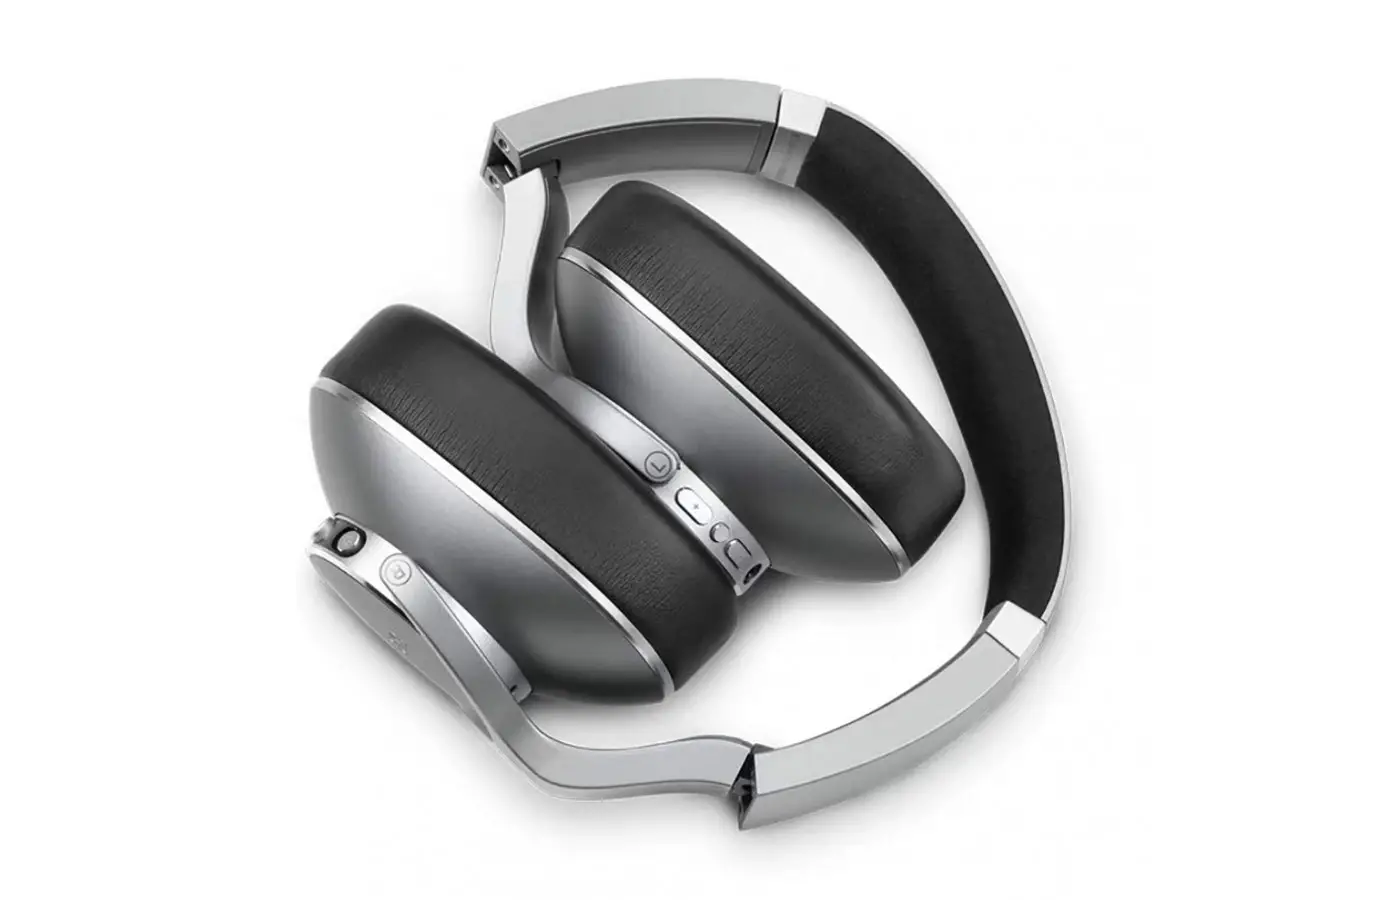 The refined look of the headphones is created by the use of subdued but durable materials. 